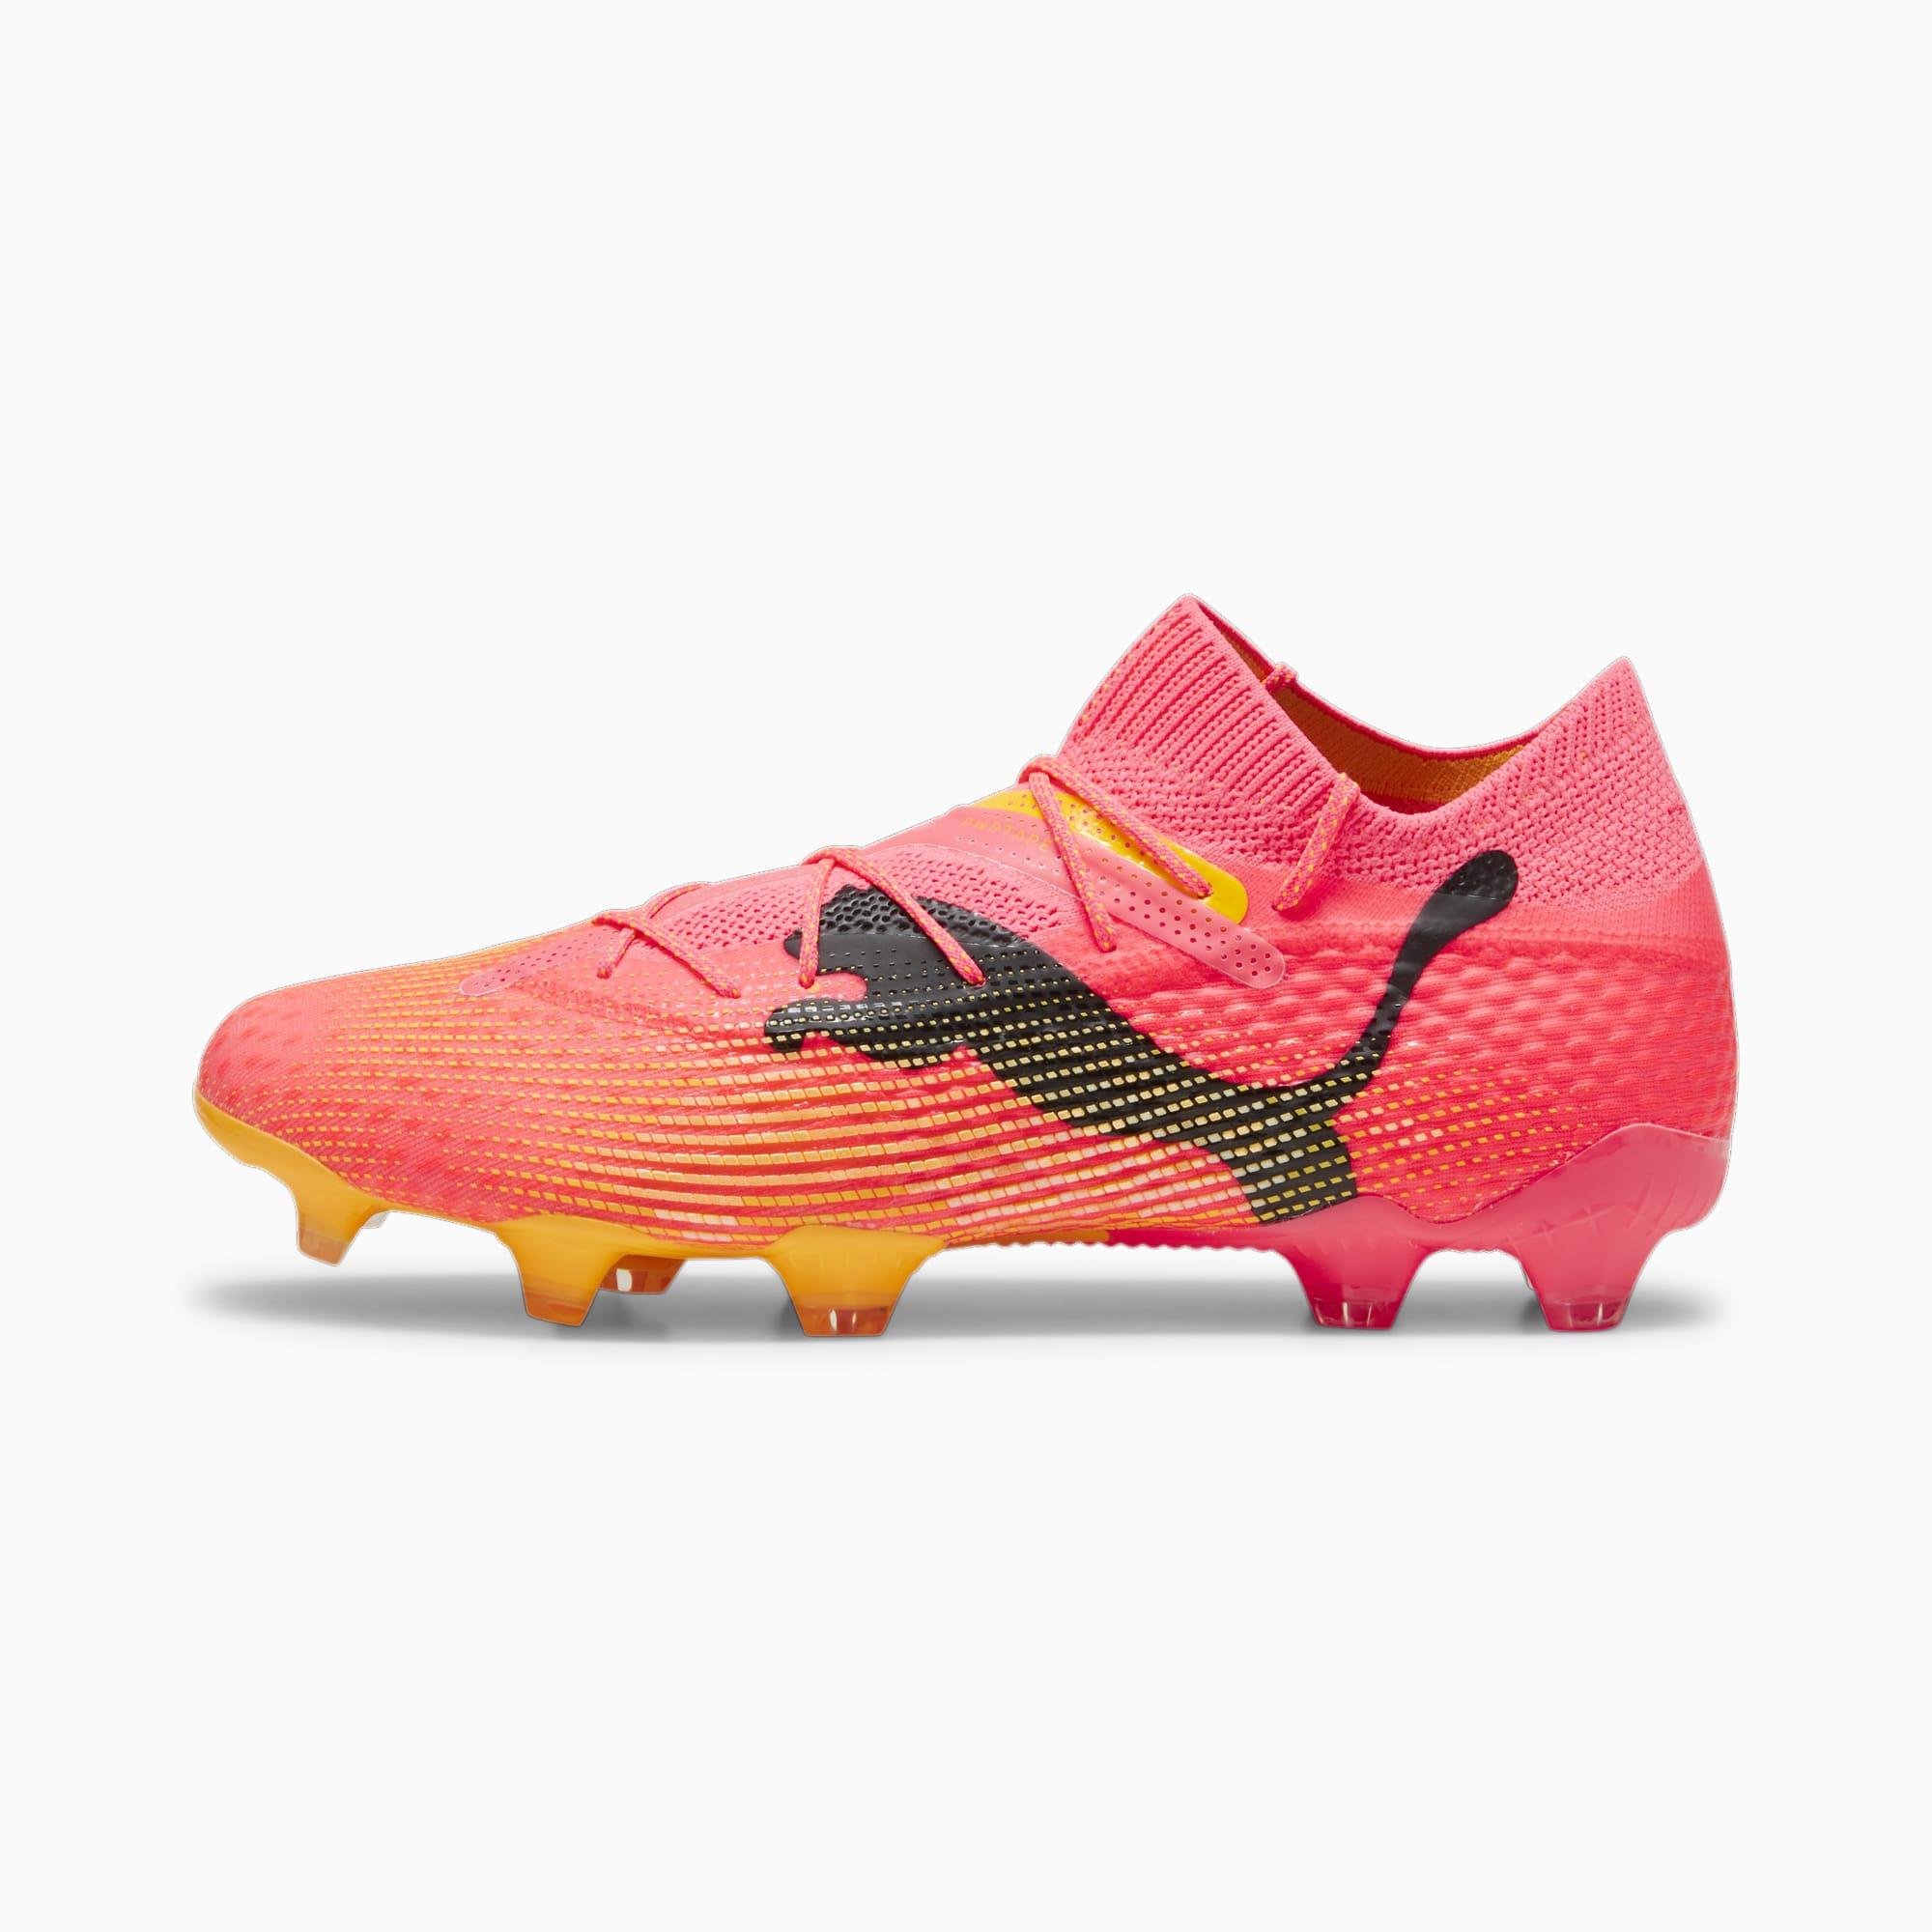 FUTURE 7 ULTIMATE Firm Ground/Arificial Ground Men's Soccer Cleats by PUMA